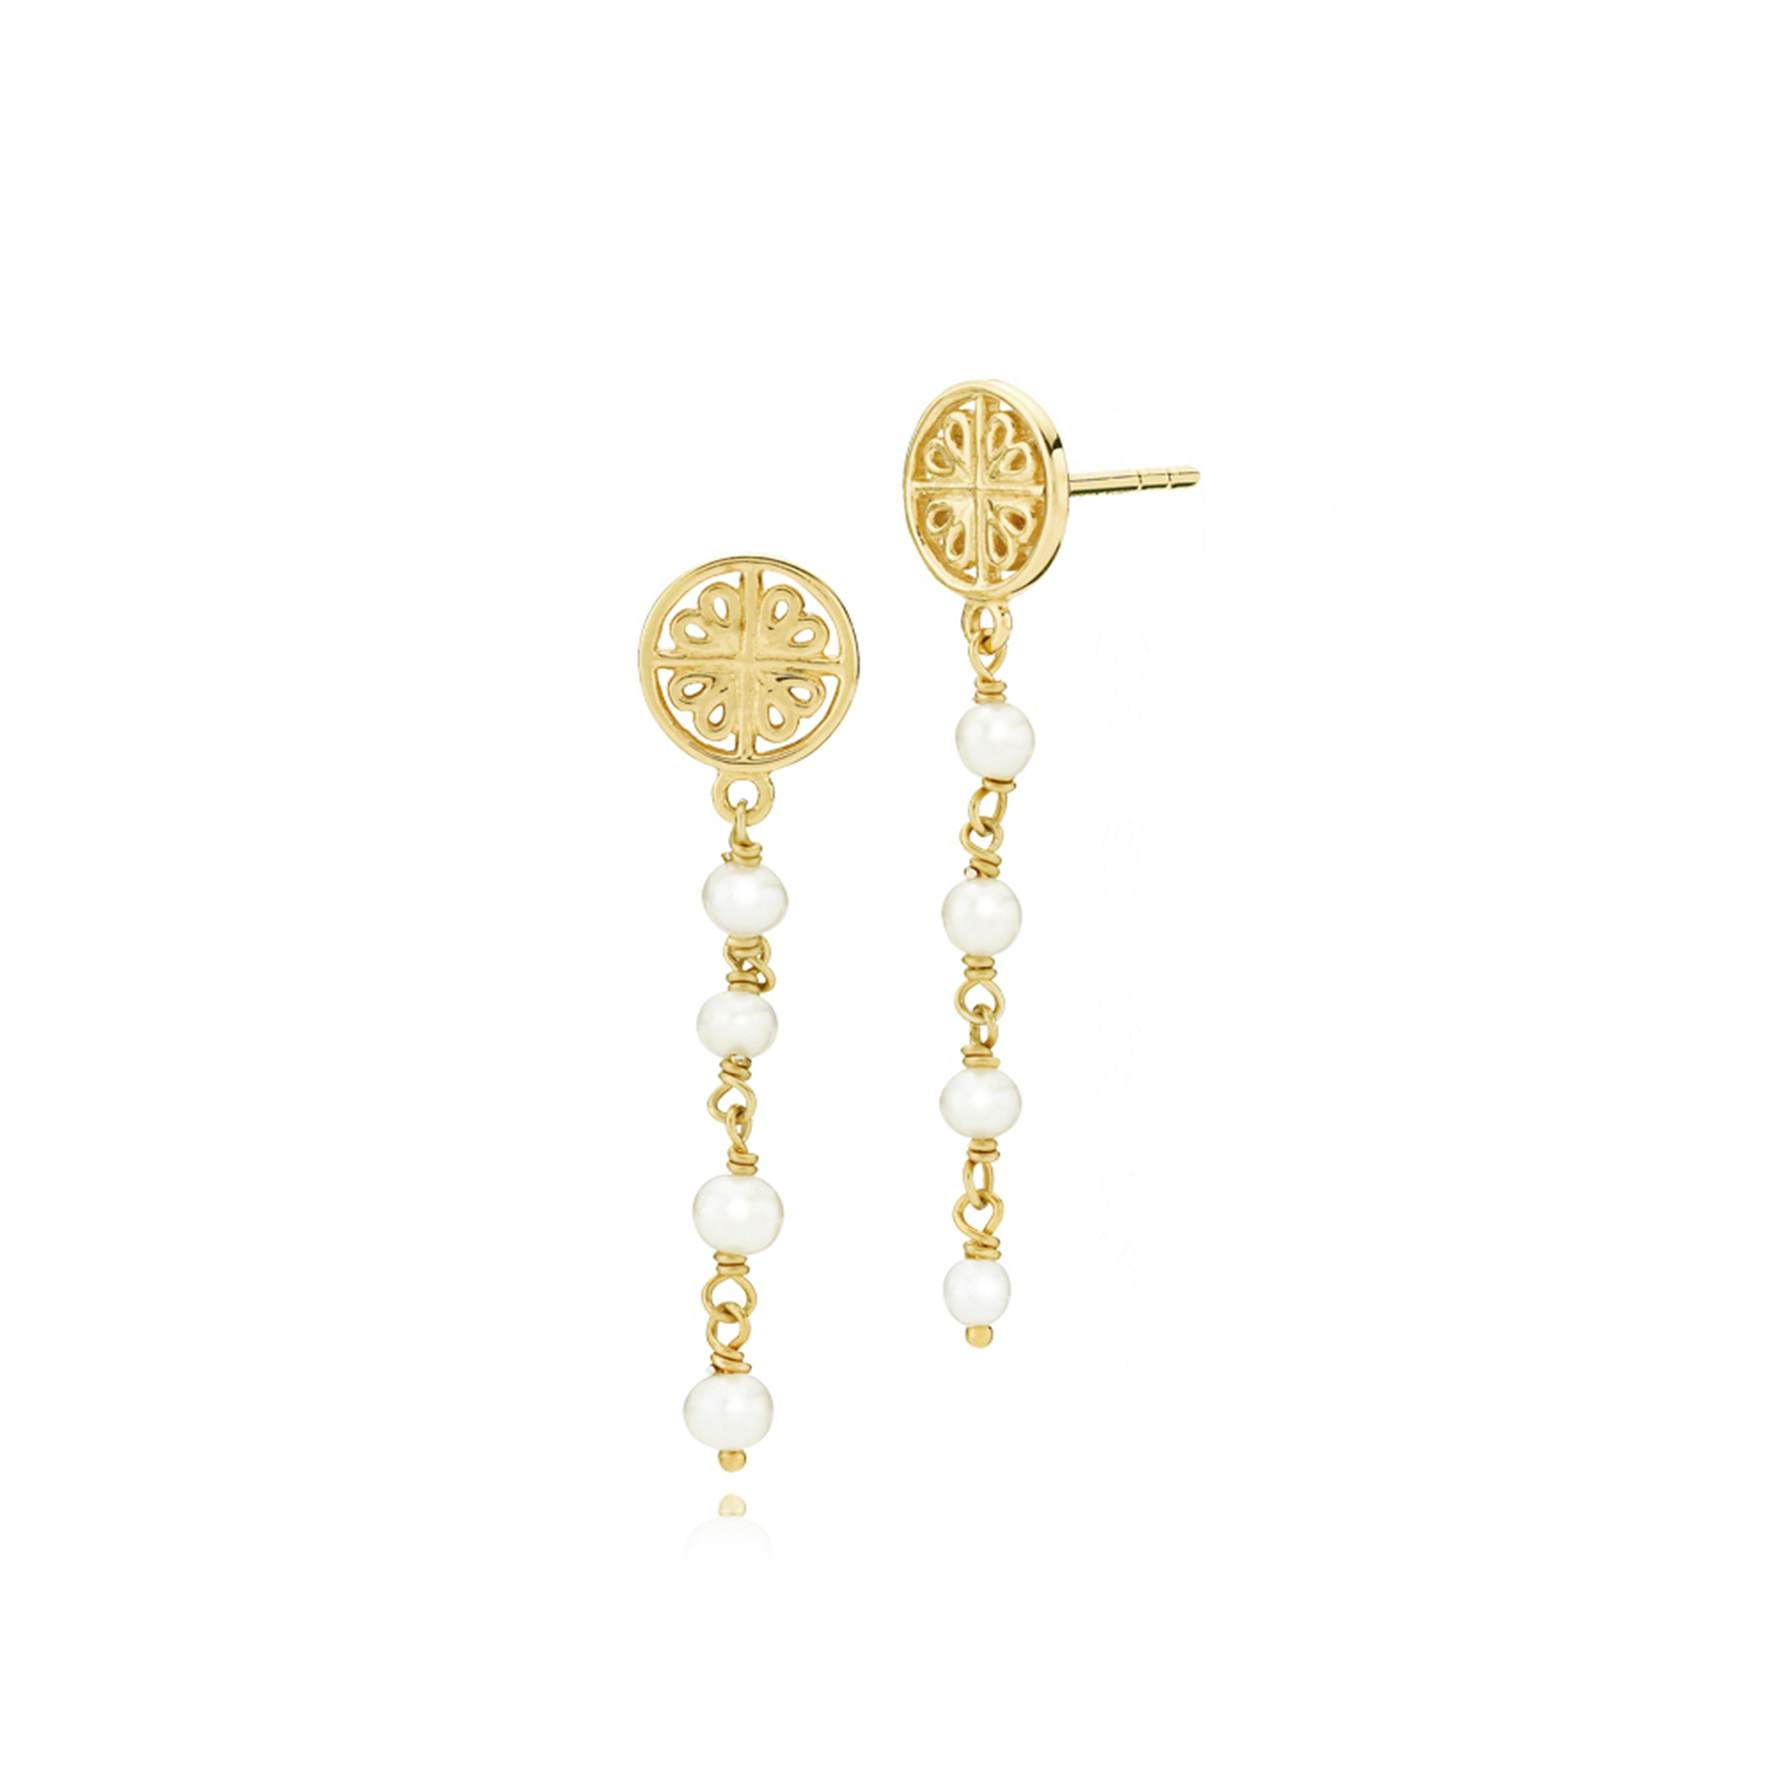 Balance Earrings With Pearl from Sistie in Goldplated-Silver Sterling 925|Freshwater Pearl|Blank